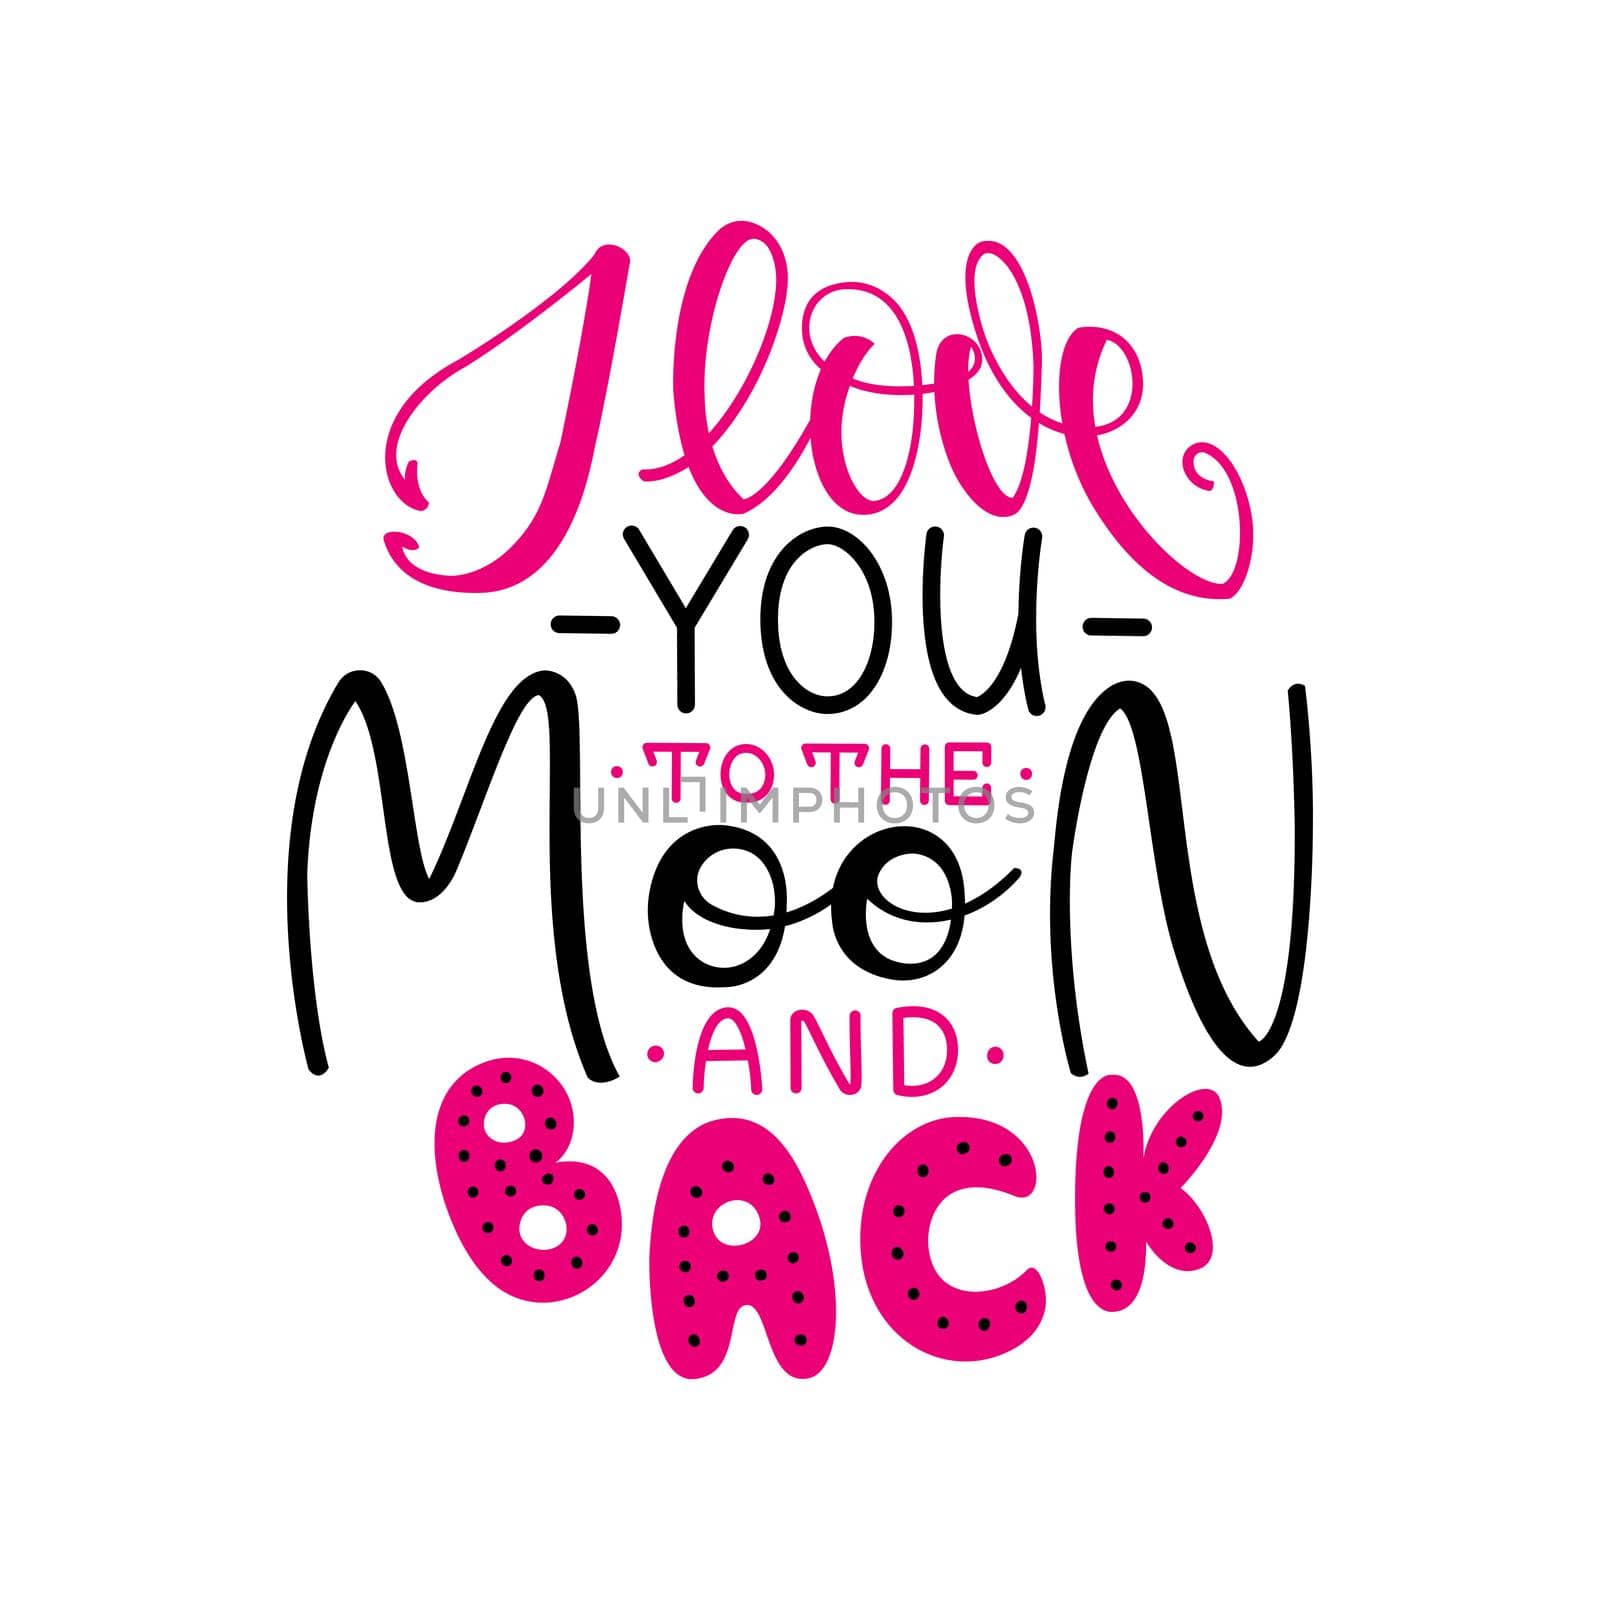 I love you to the moon and back. Inspirational romantic lettering isolated on white background. illustration for Valentines day greeting cards, posters and much more.